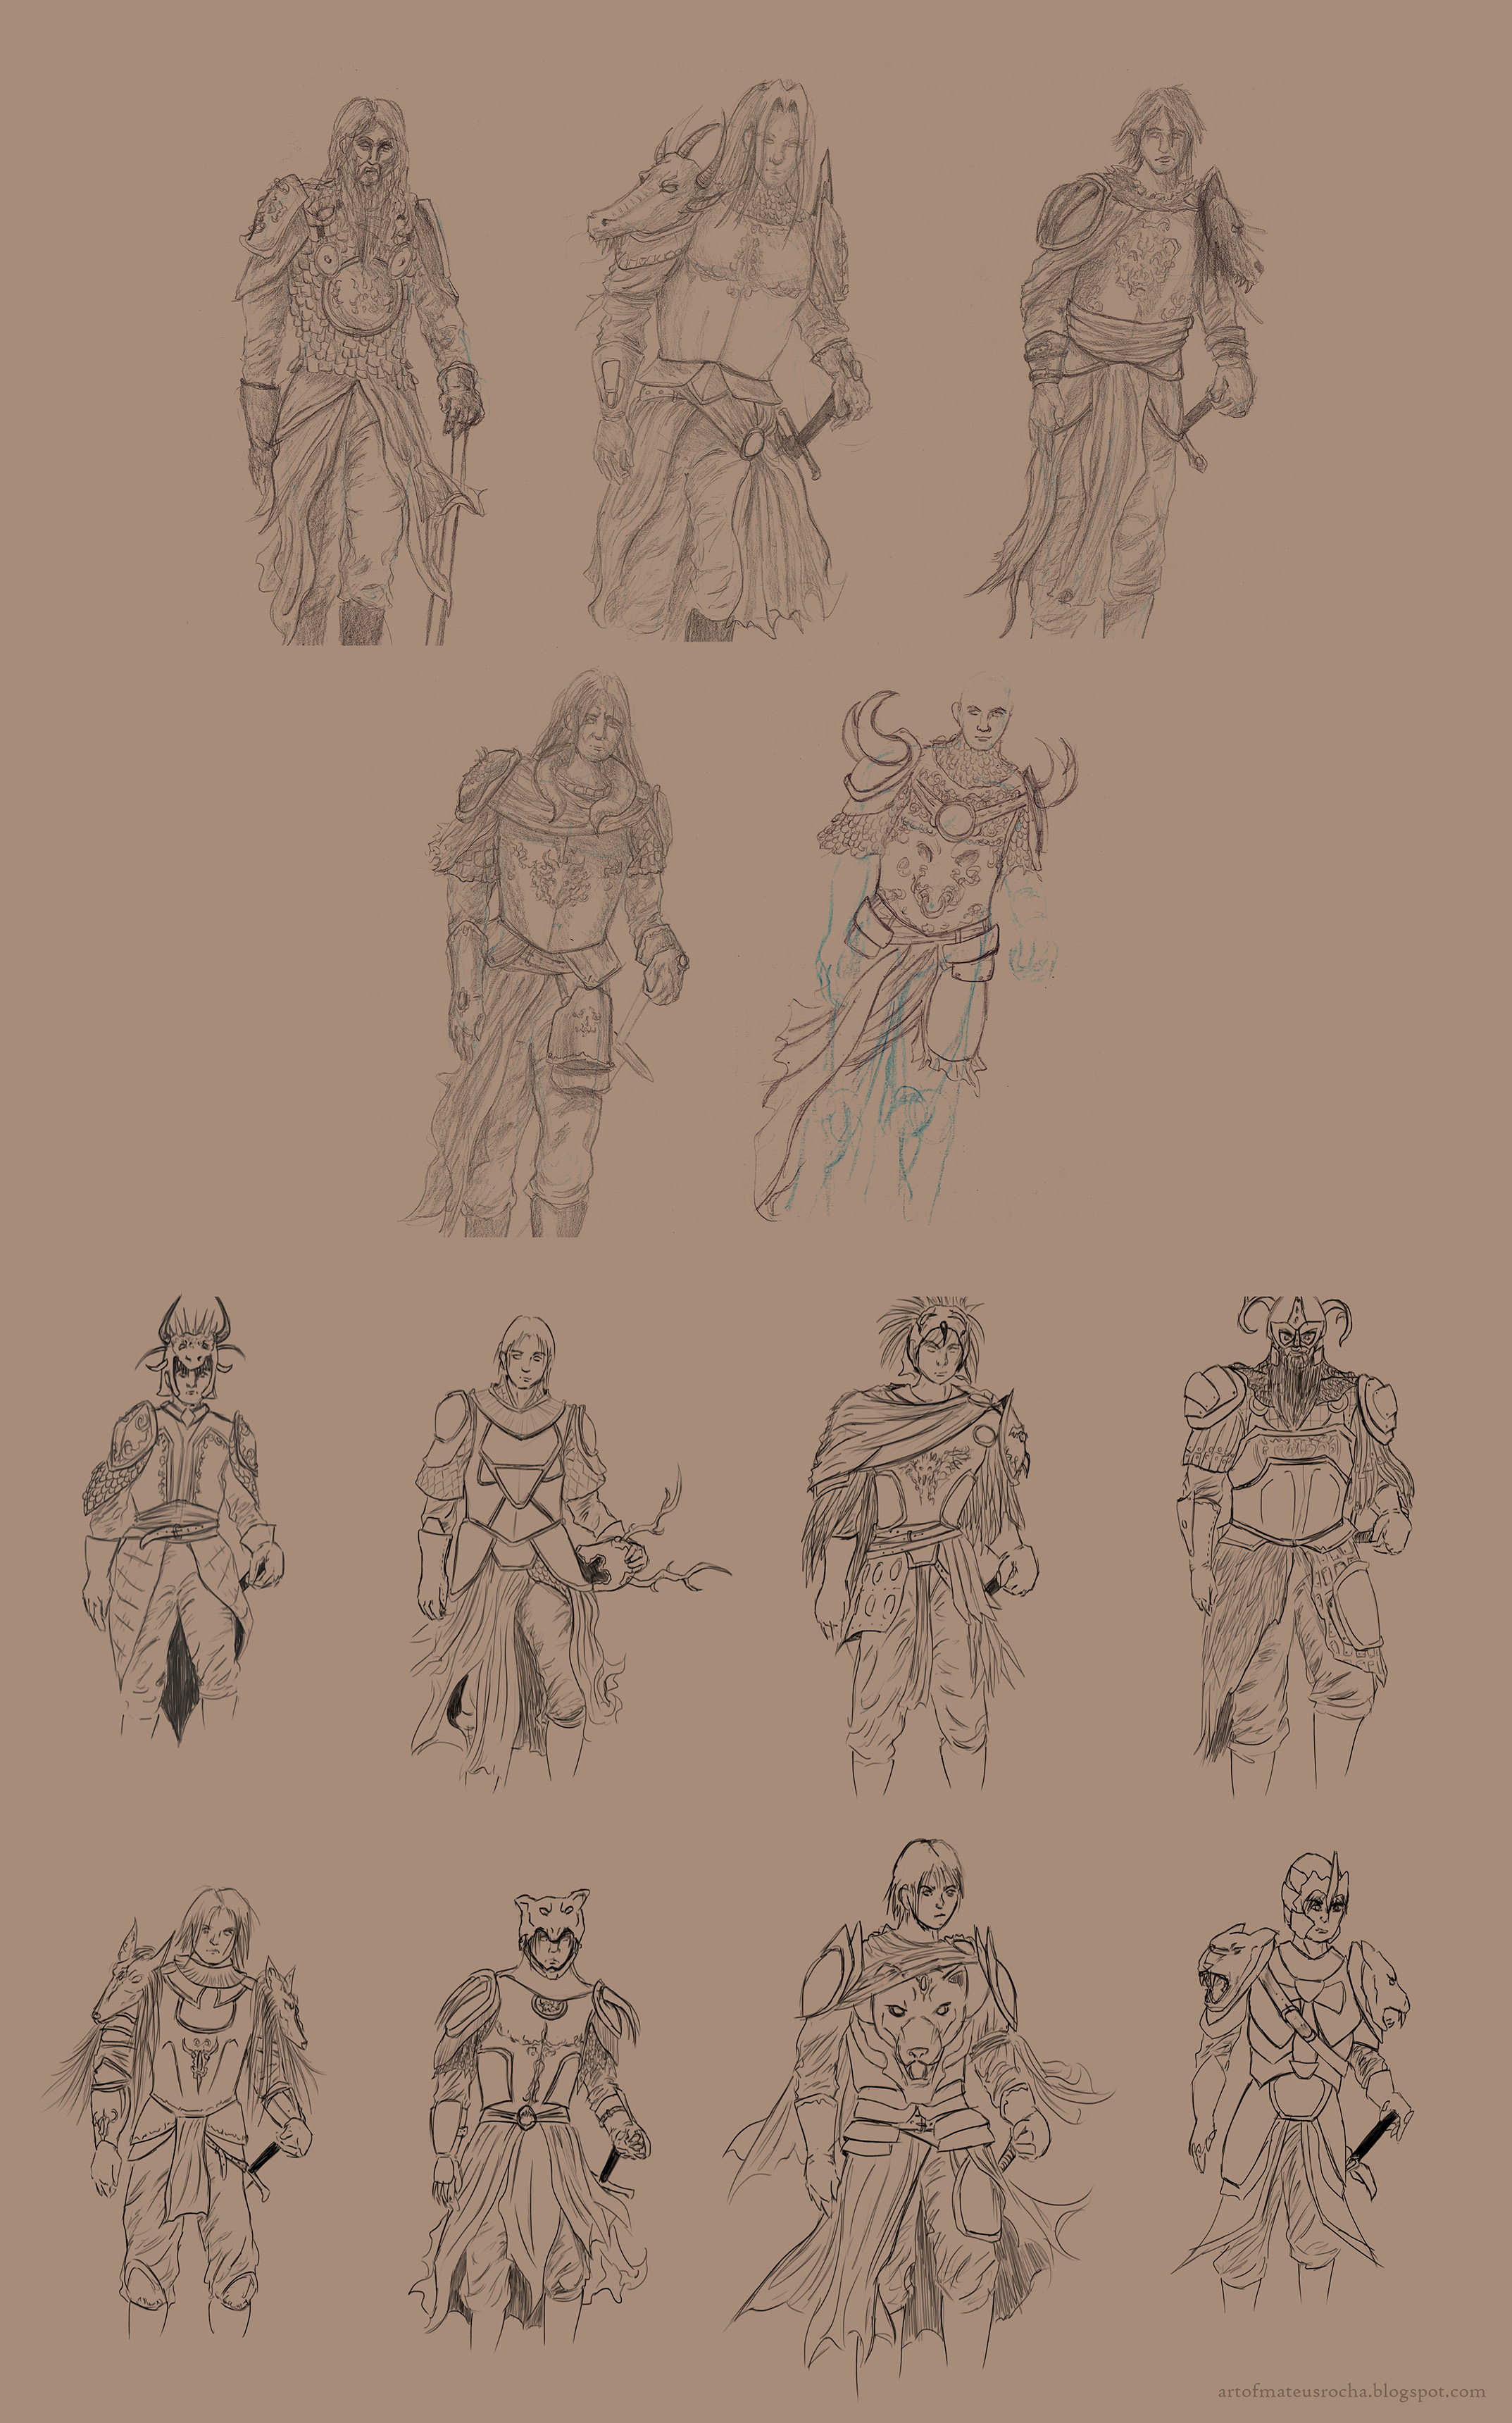 [Image: 23_03_13_all_armor_concepts_by_mateusrocha-d5z1xcx.jpg]